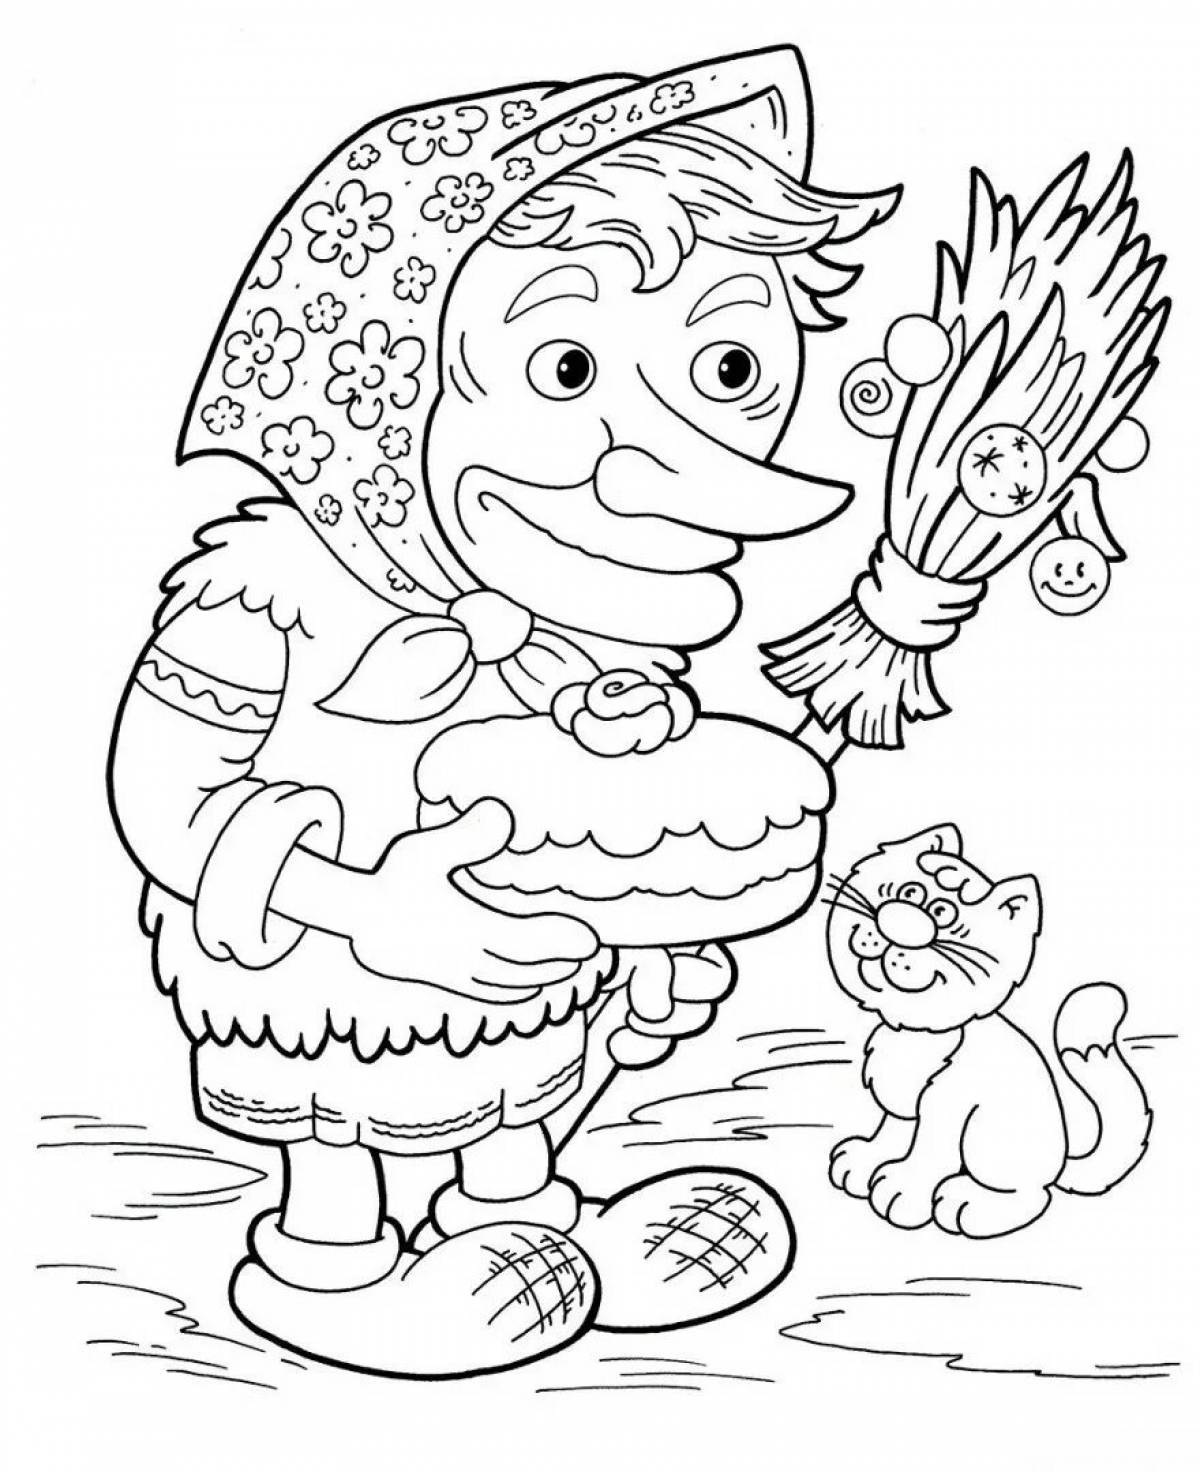 Gorgeous baba yaga coloring book for preschoolers